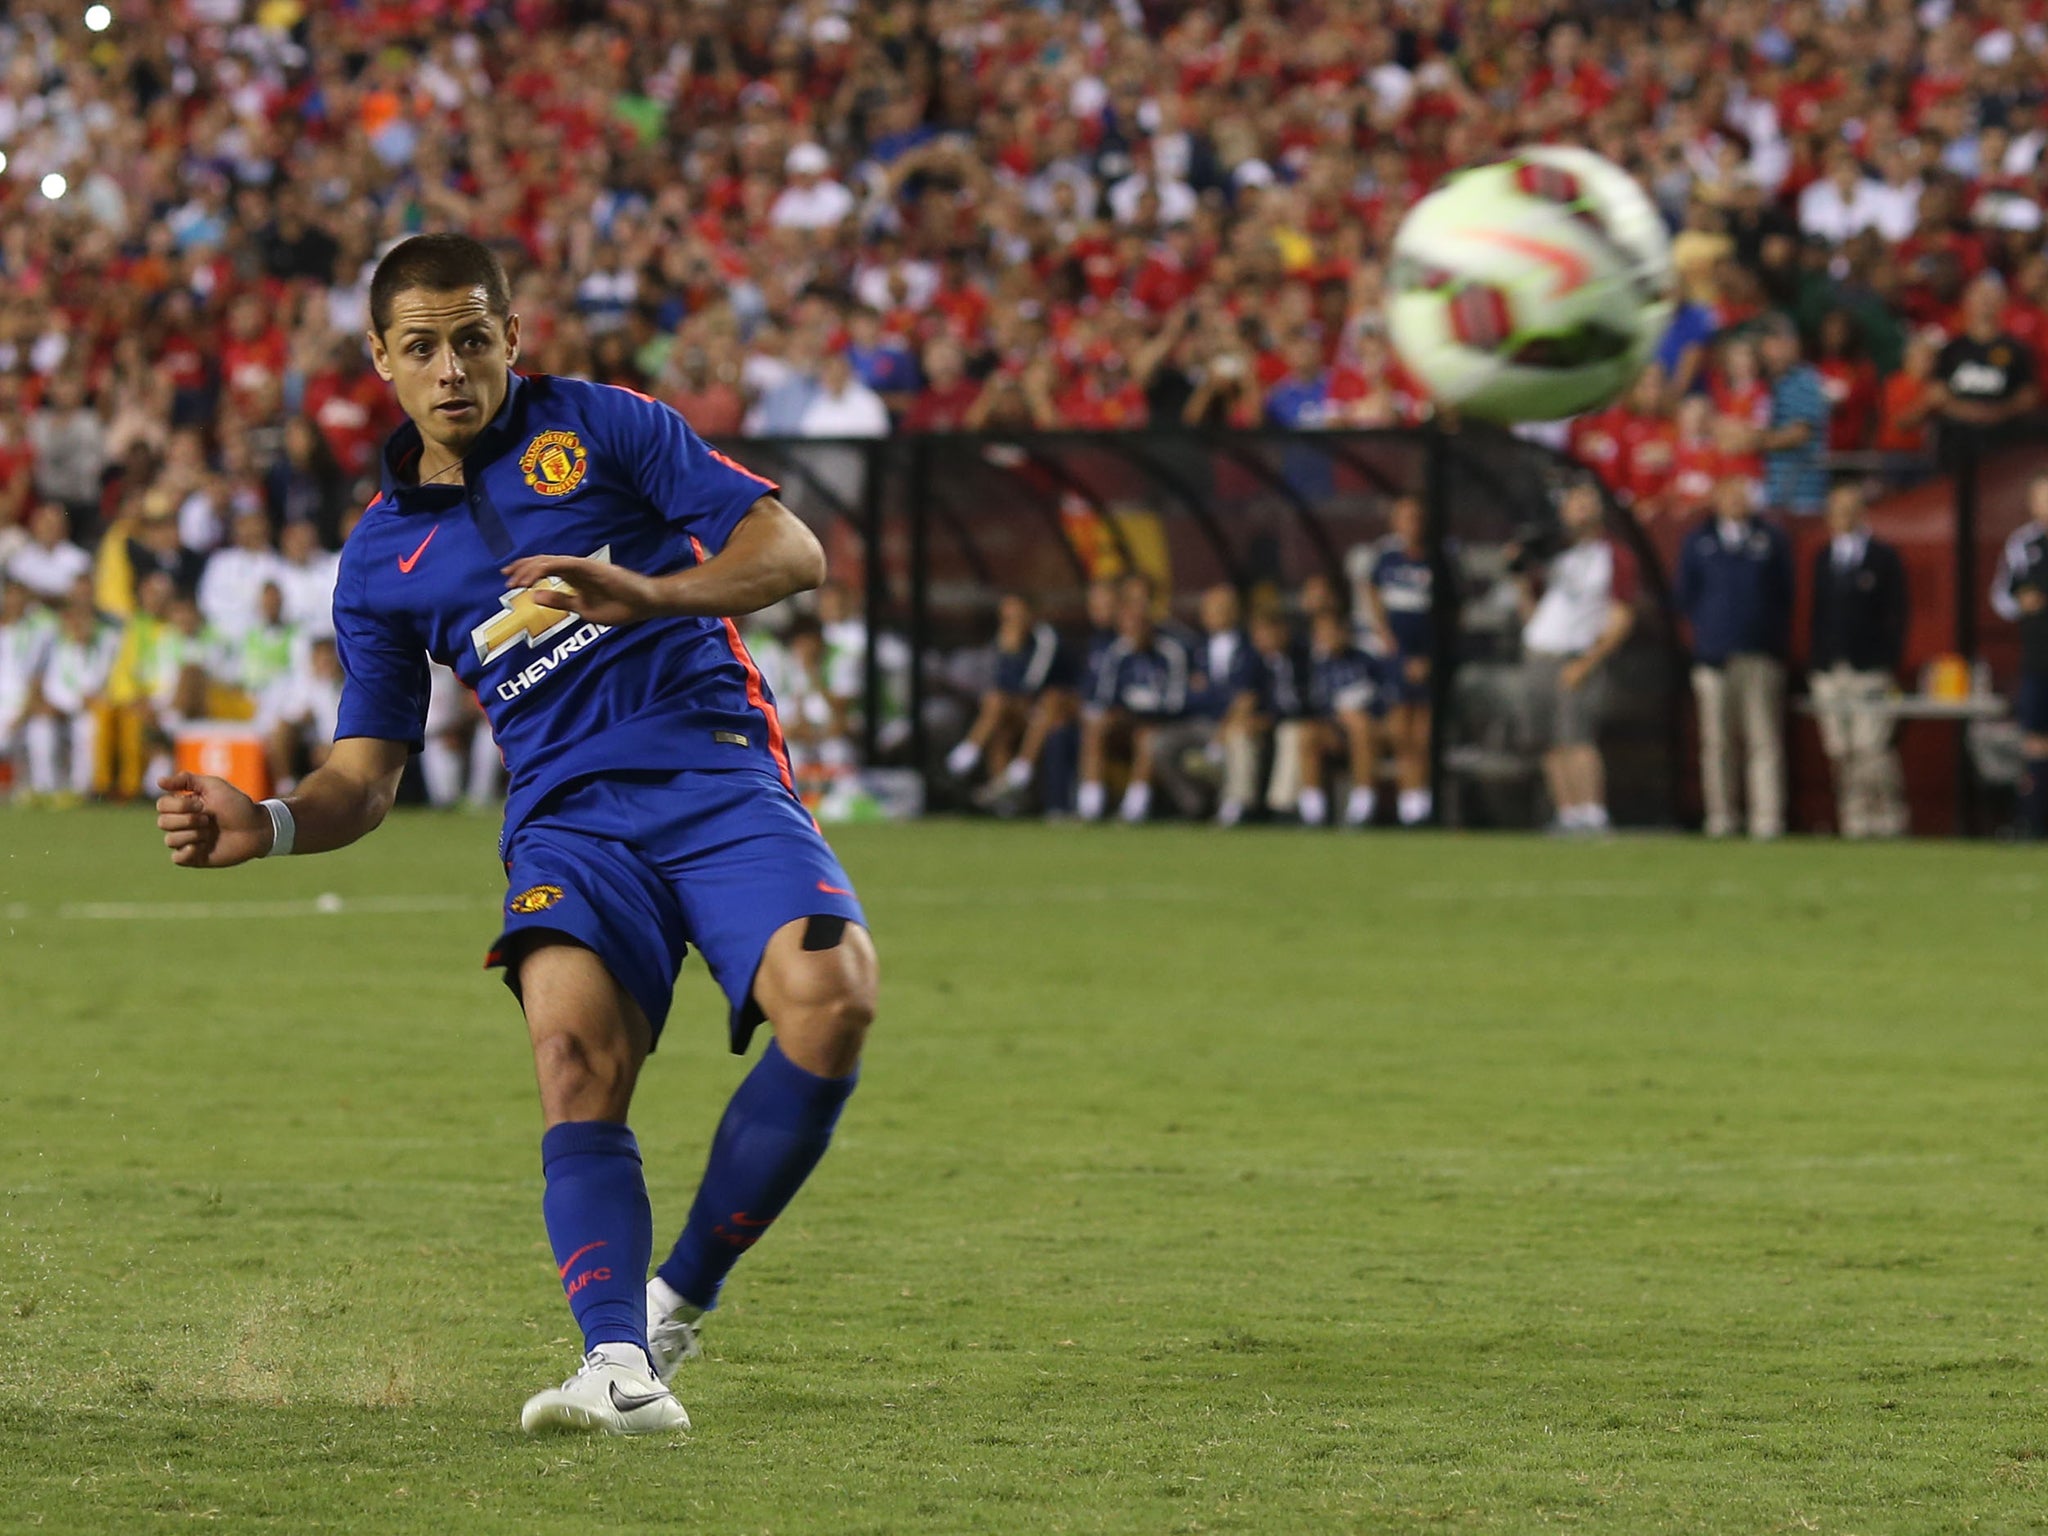 Javier Hernandez in action for Manchester United during pre-season